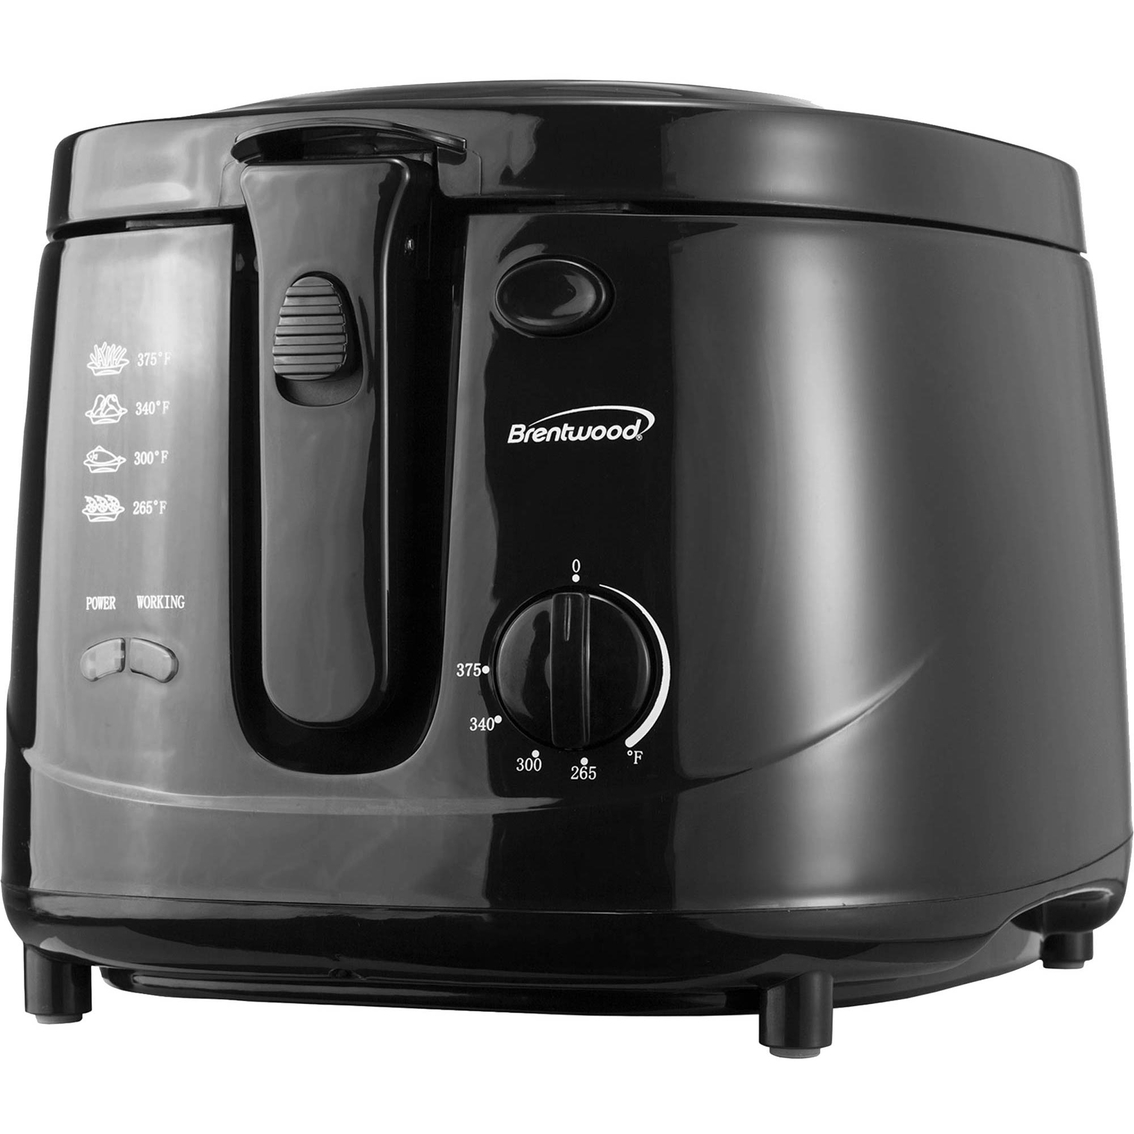 Brentwood 12 Cup Electric Deep Fryer - Image 3 of 9